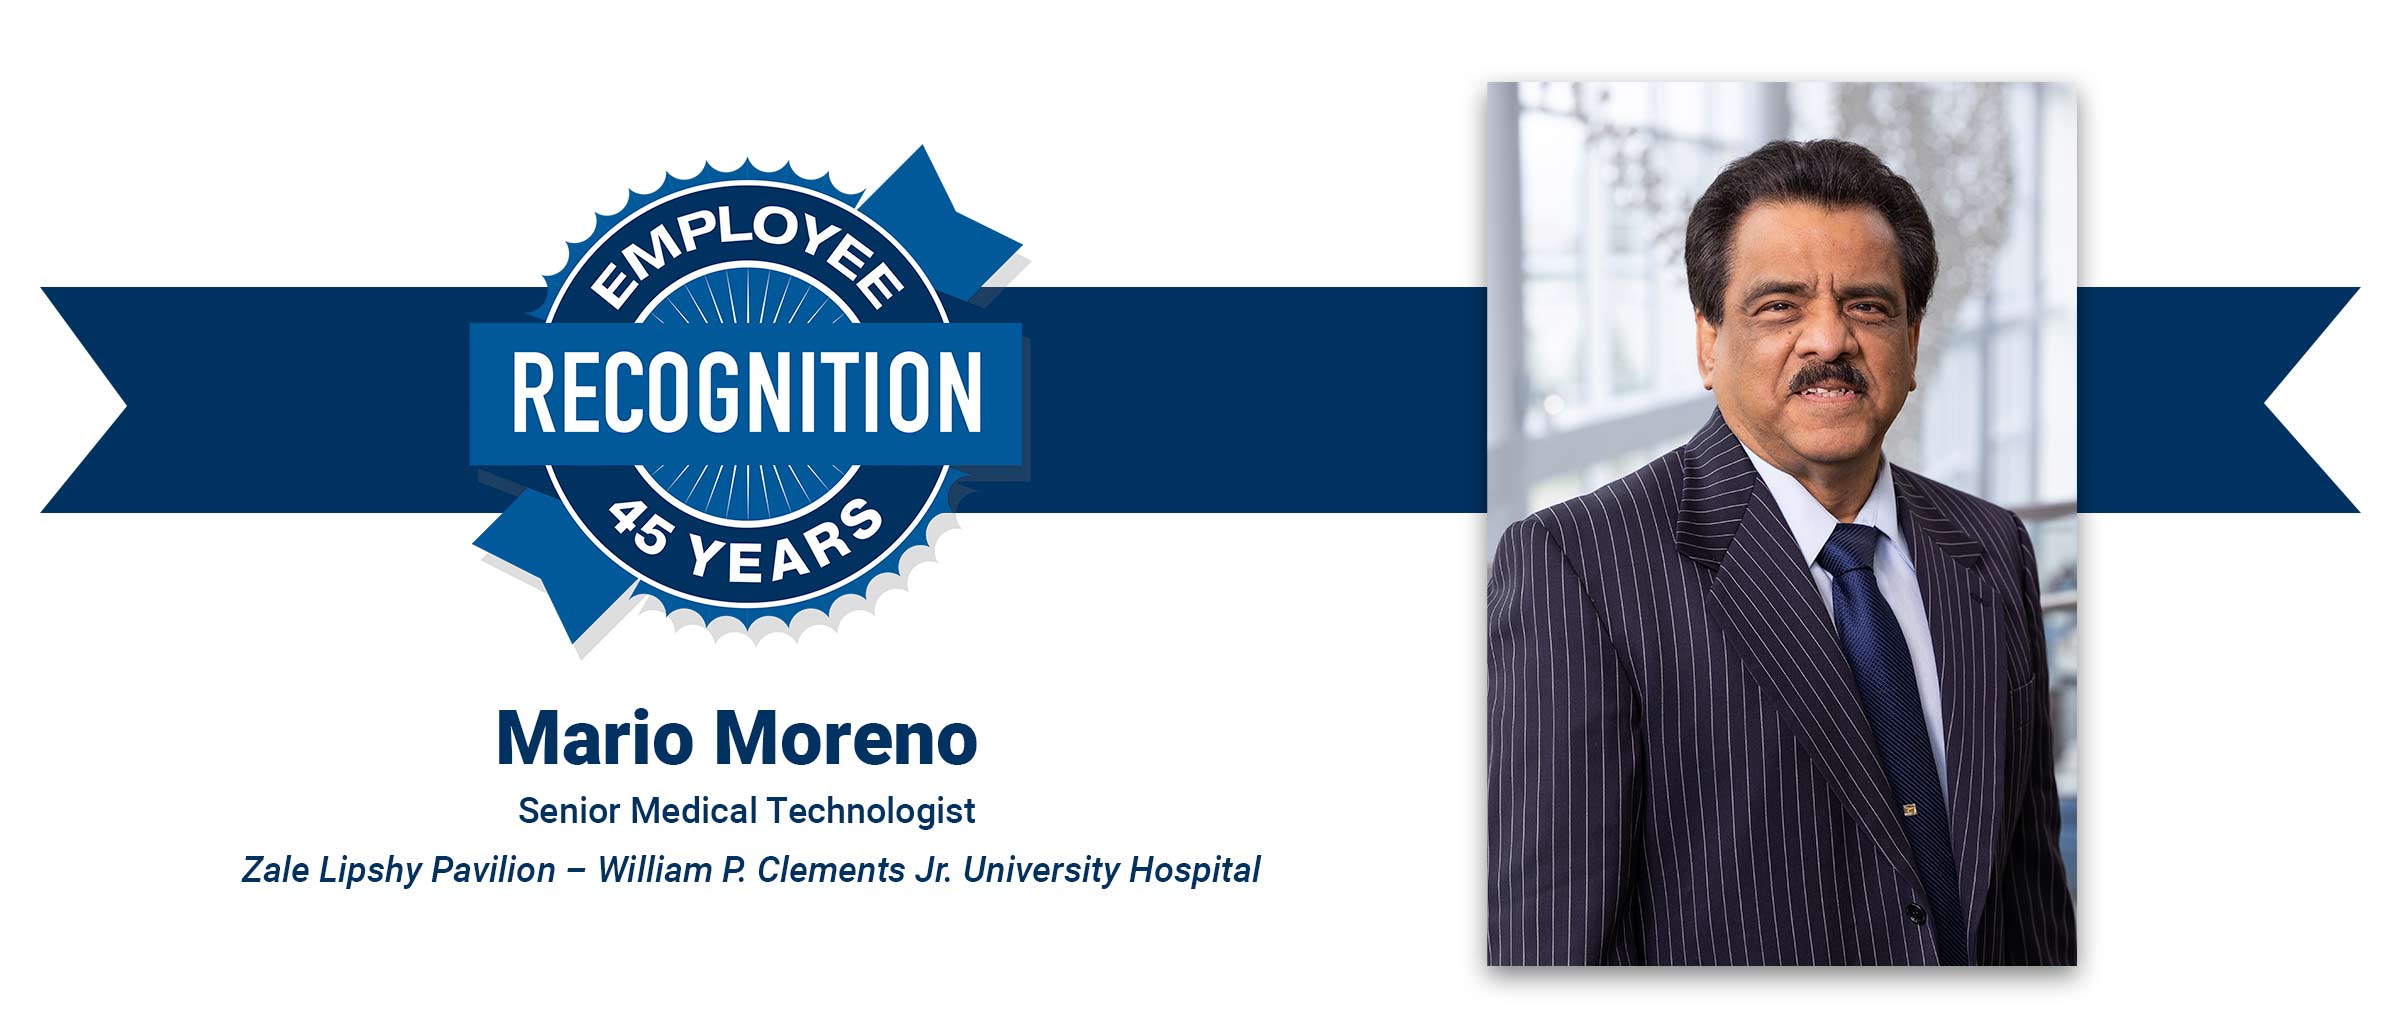 Man with black hair, mustache, striped suite. Mario Moreno, 45 years employee recognition.